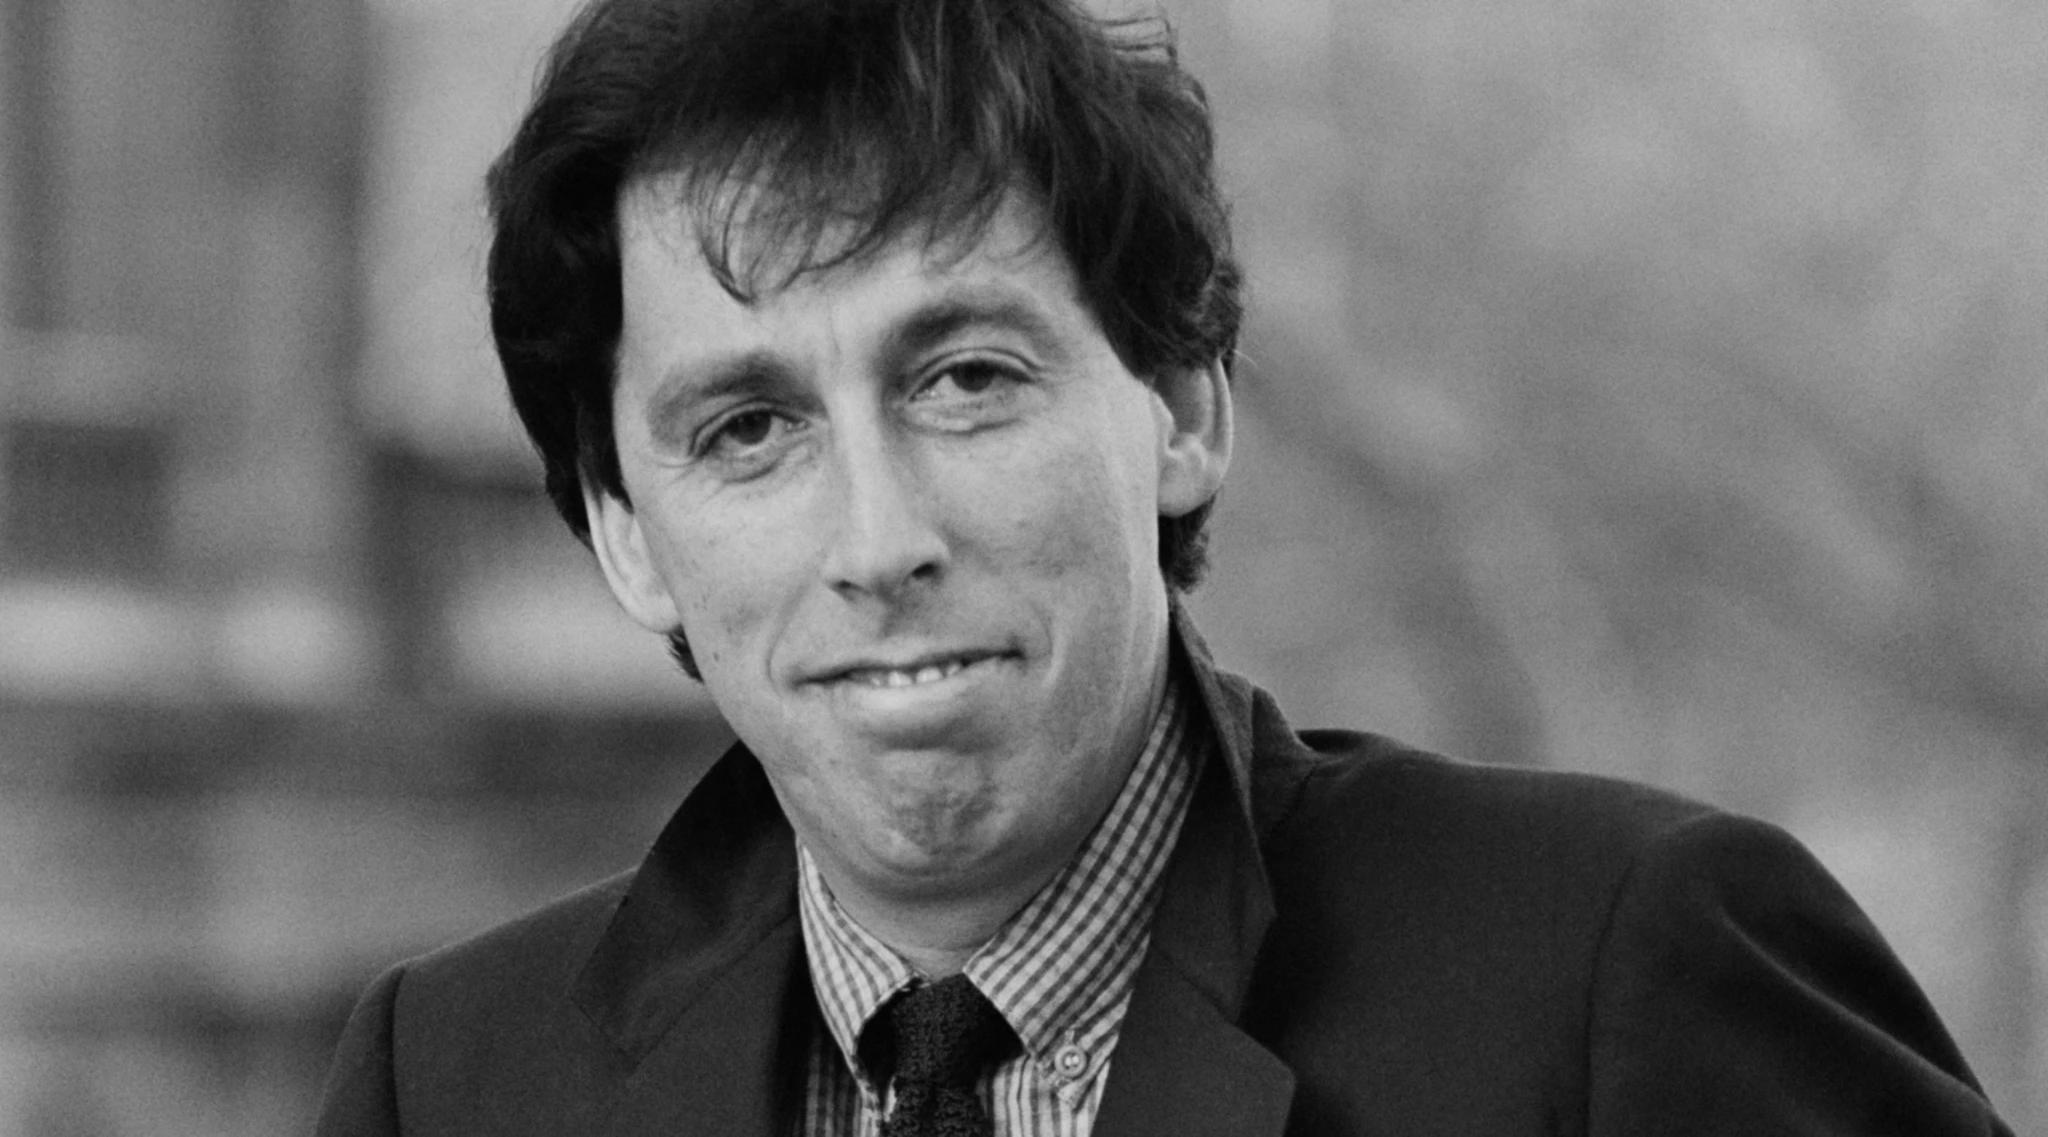 Ivan Reitman, Director and Producer, Dies at 75